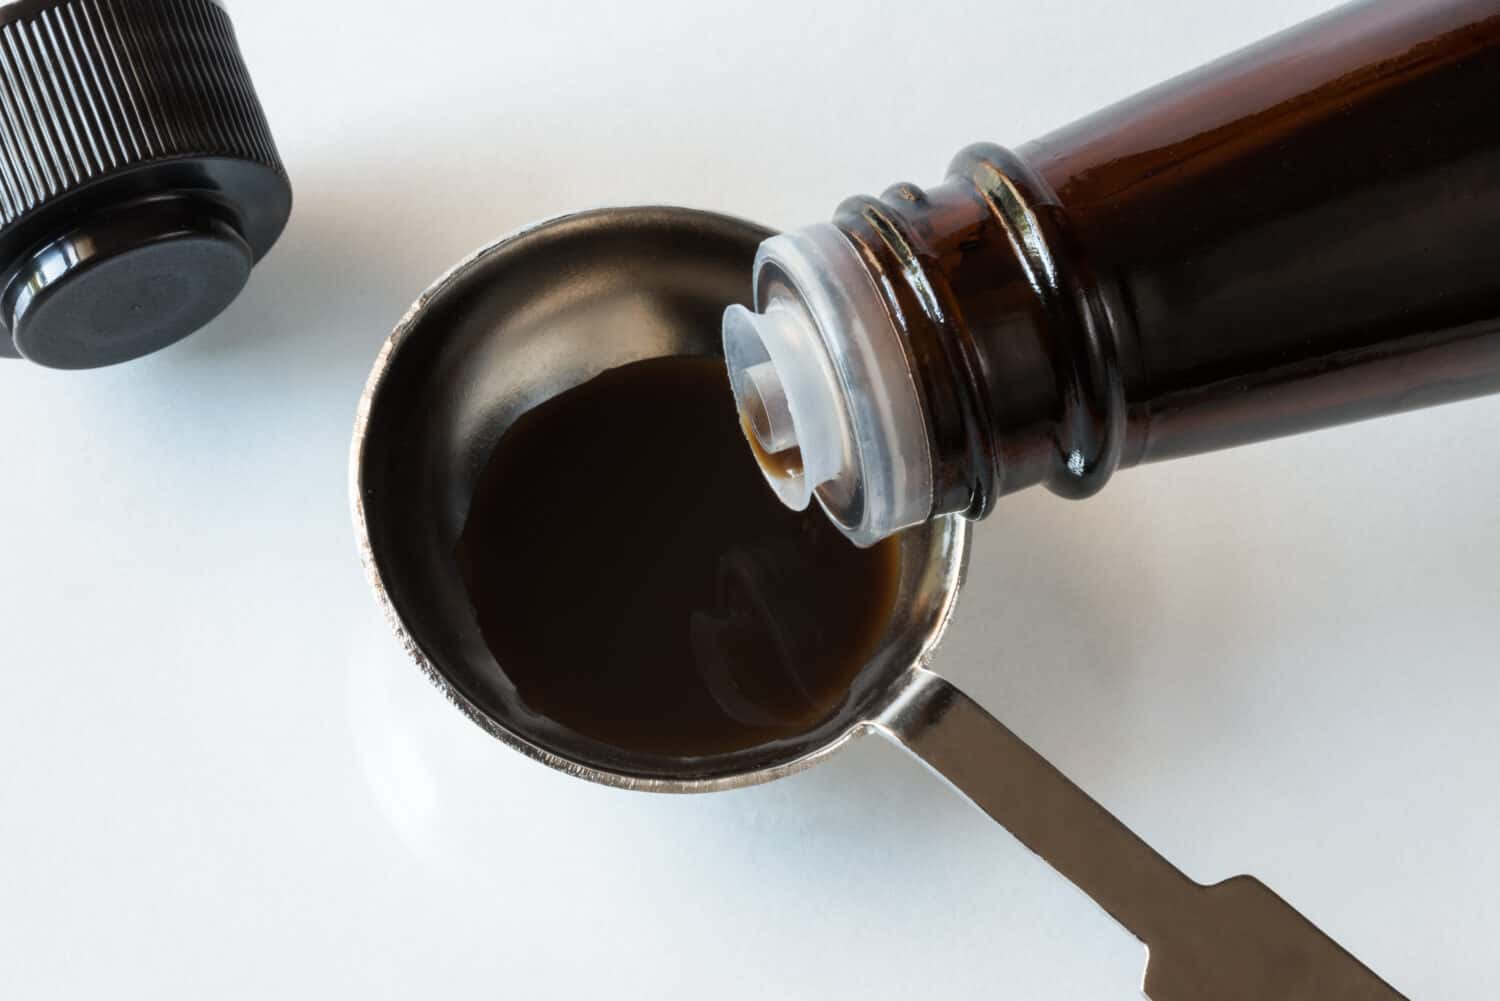 Pouring Worcestershire Sauce in a Teaspoon